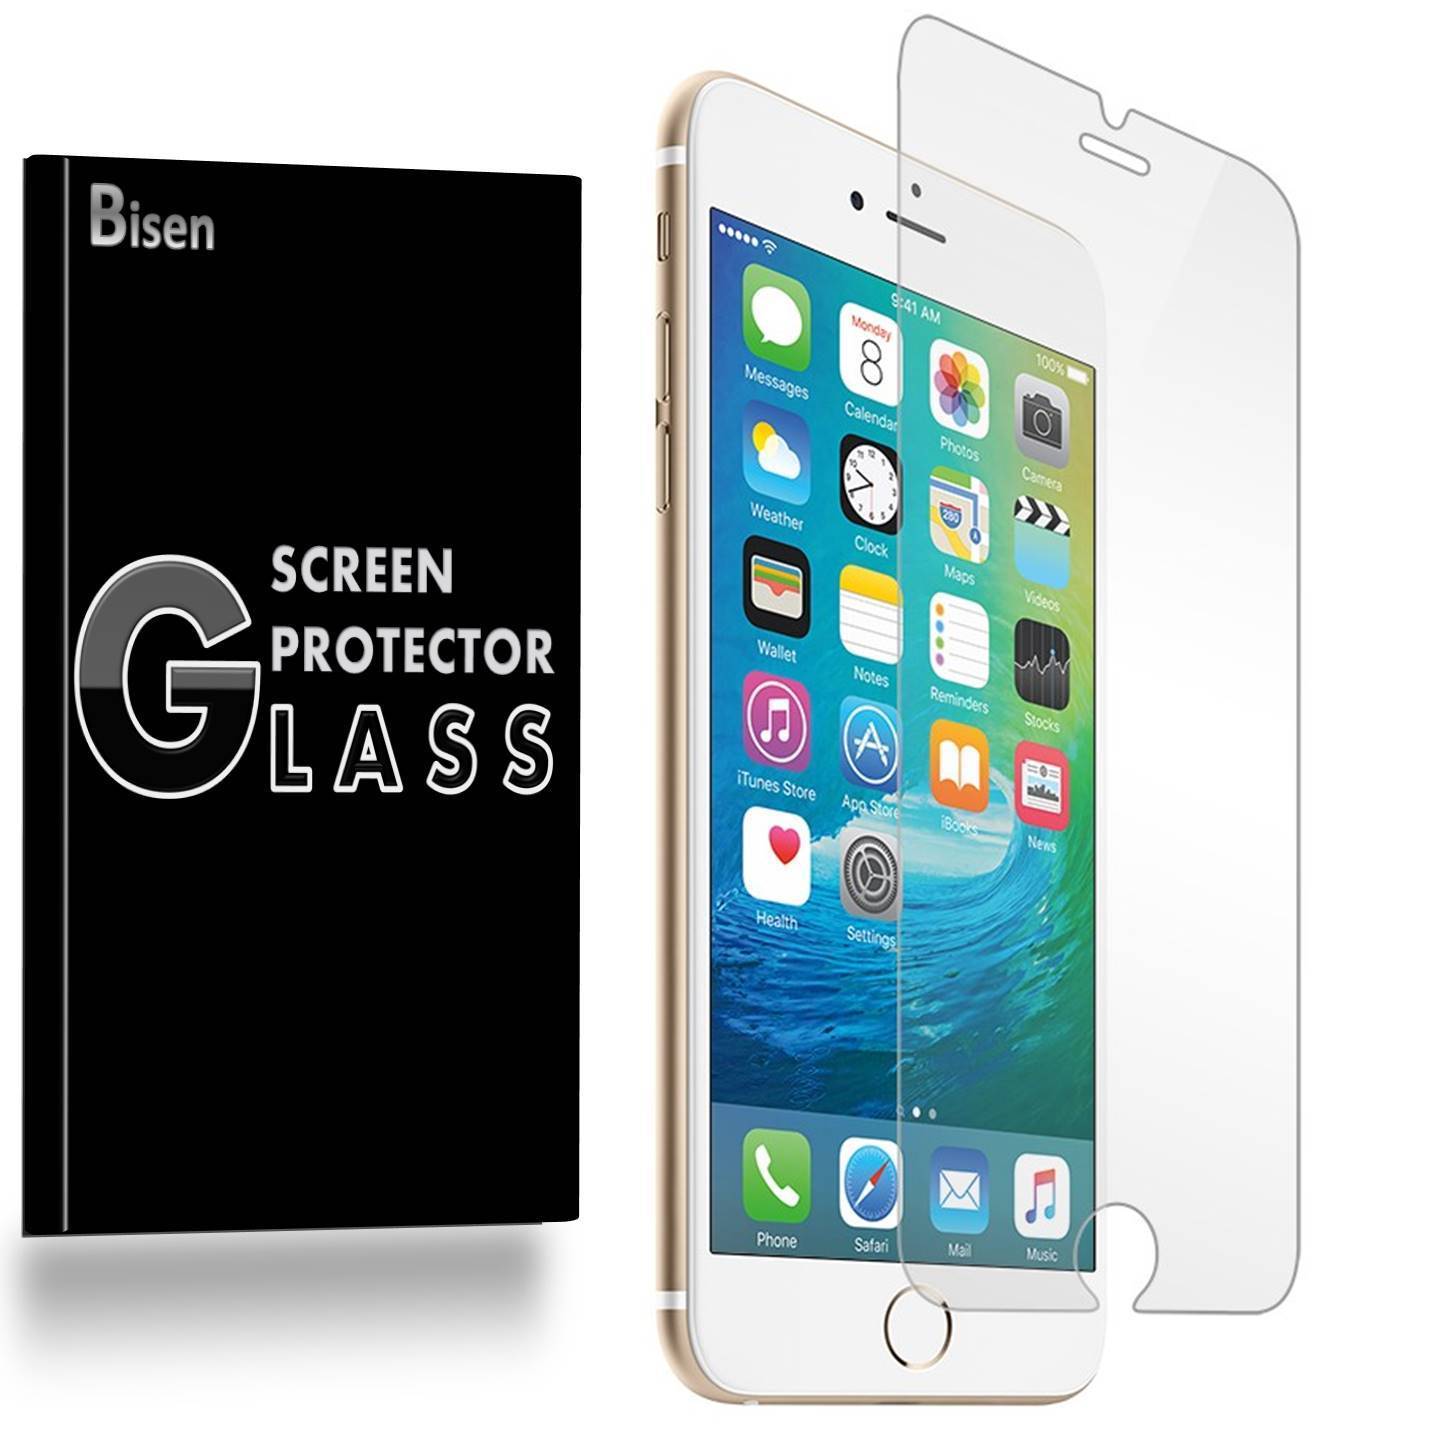 iPhone 8 Plus 5.5" (2017) / iPhone 7 Plus 5.5" (2016) [3-Pack BISEN] 9H Tempered Glass Screen Protector, Anti-Scratch, Anti-Shock, Shatterproof, Bubble Free - image 1 of 4